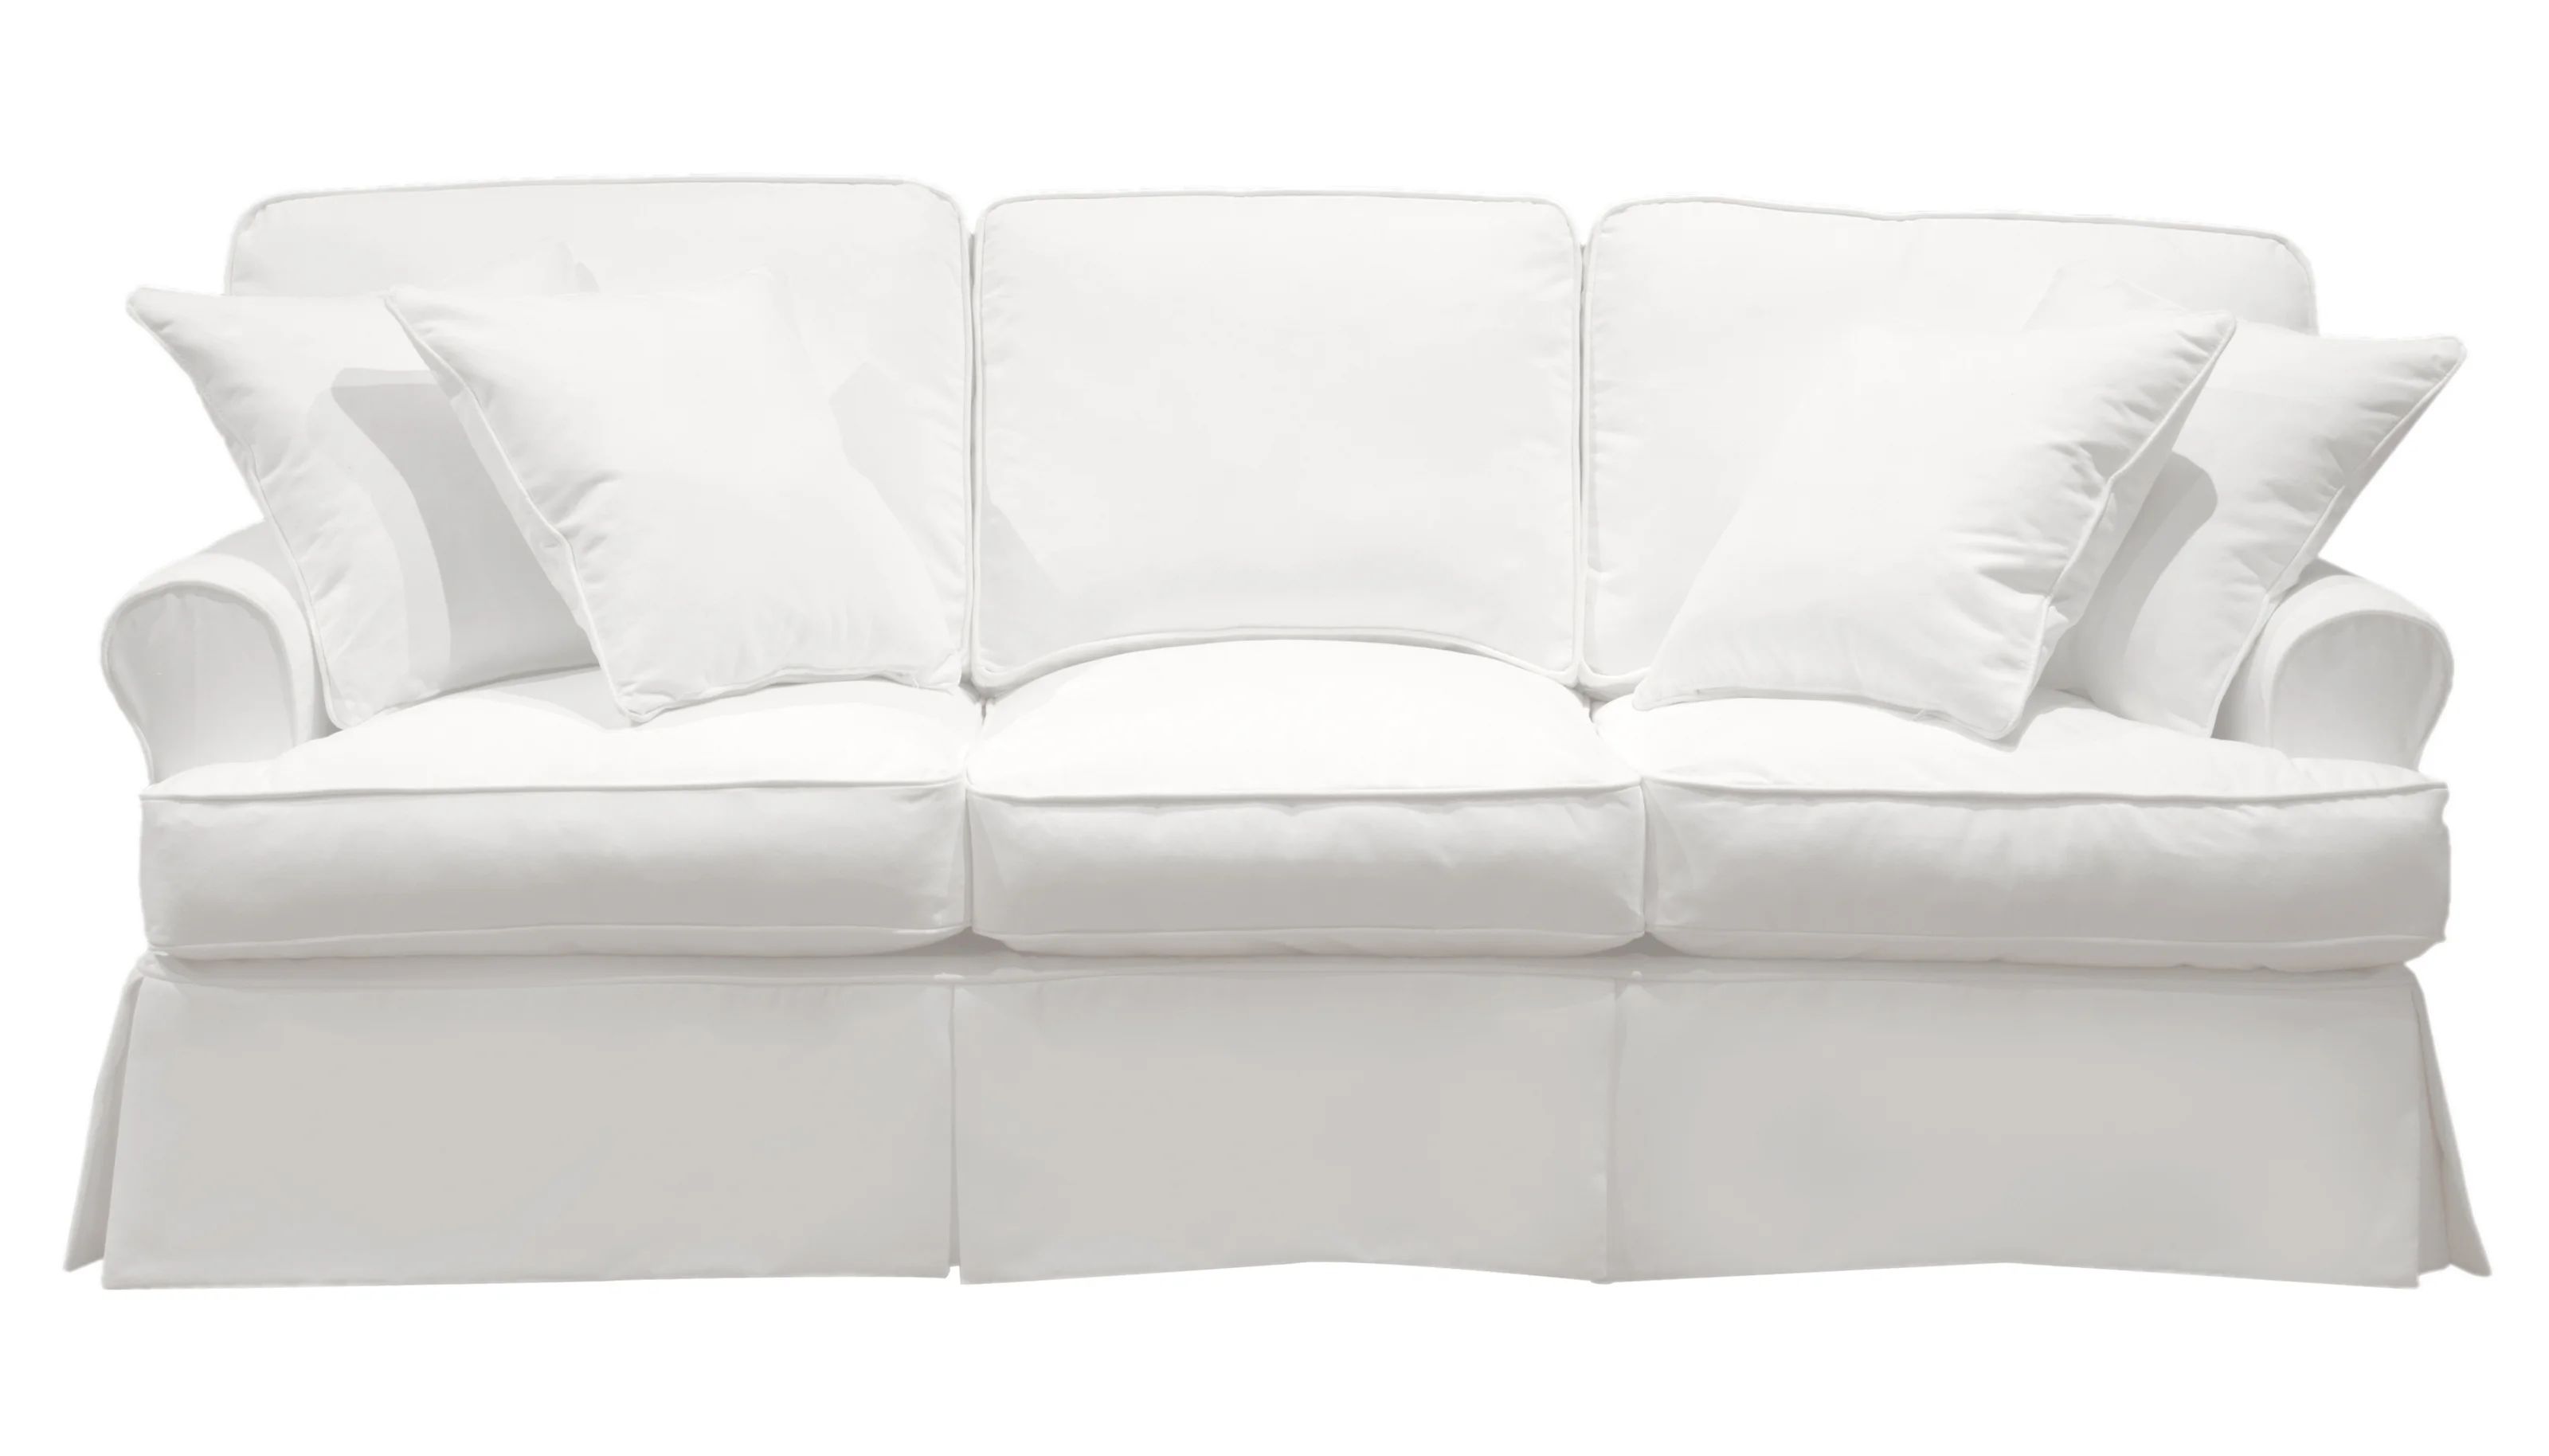 Rundle 85" Slipcovered Sofa with Reversible Cushions | Wayfair Professional